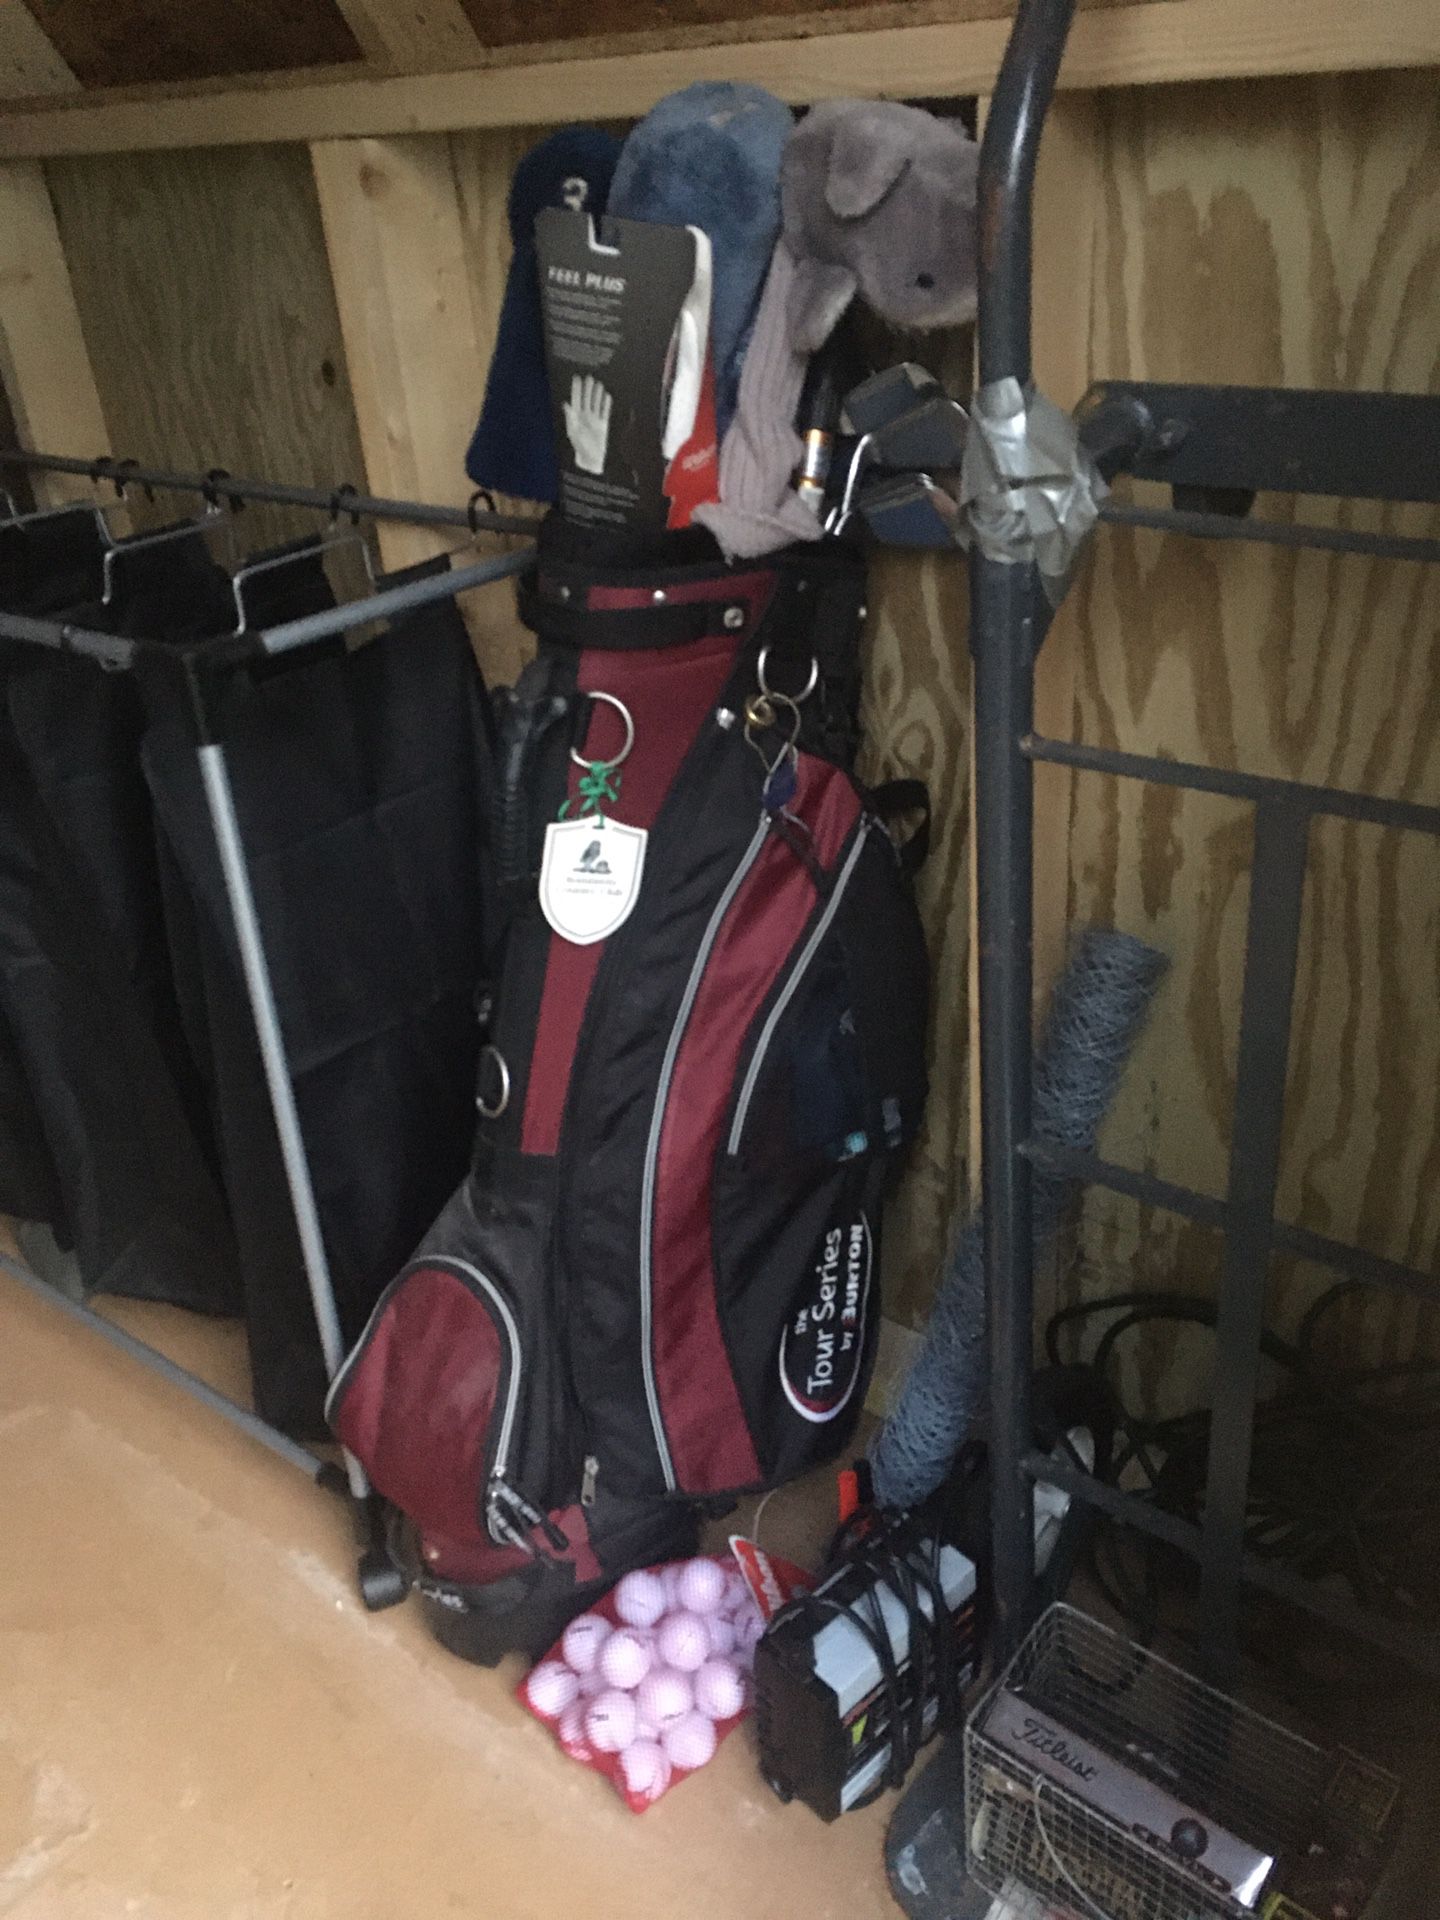 Golf Clubs, Bag And Excessories